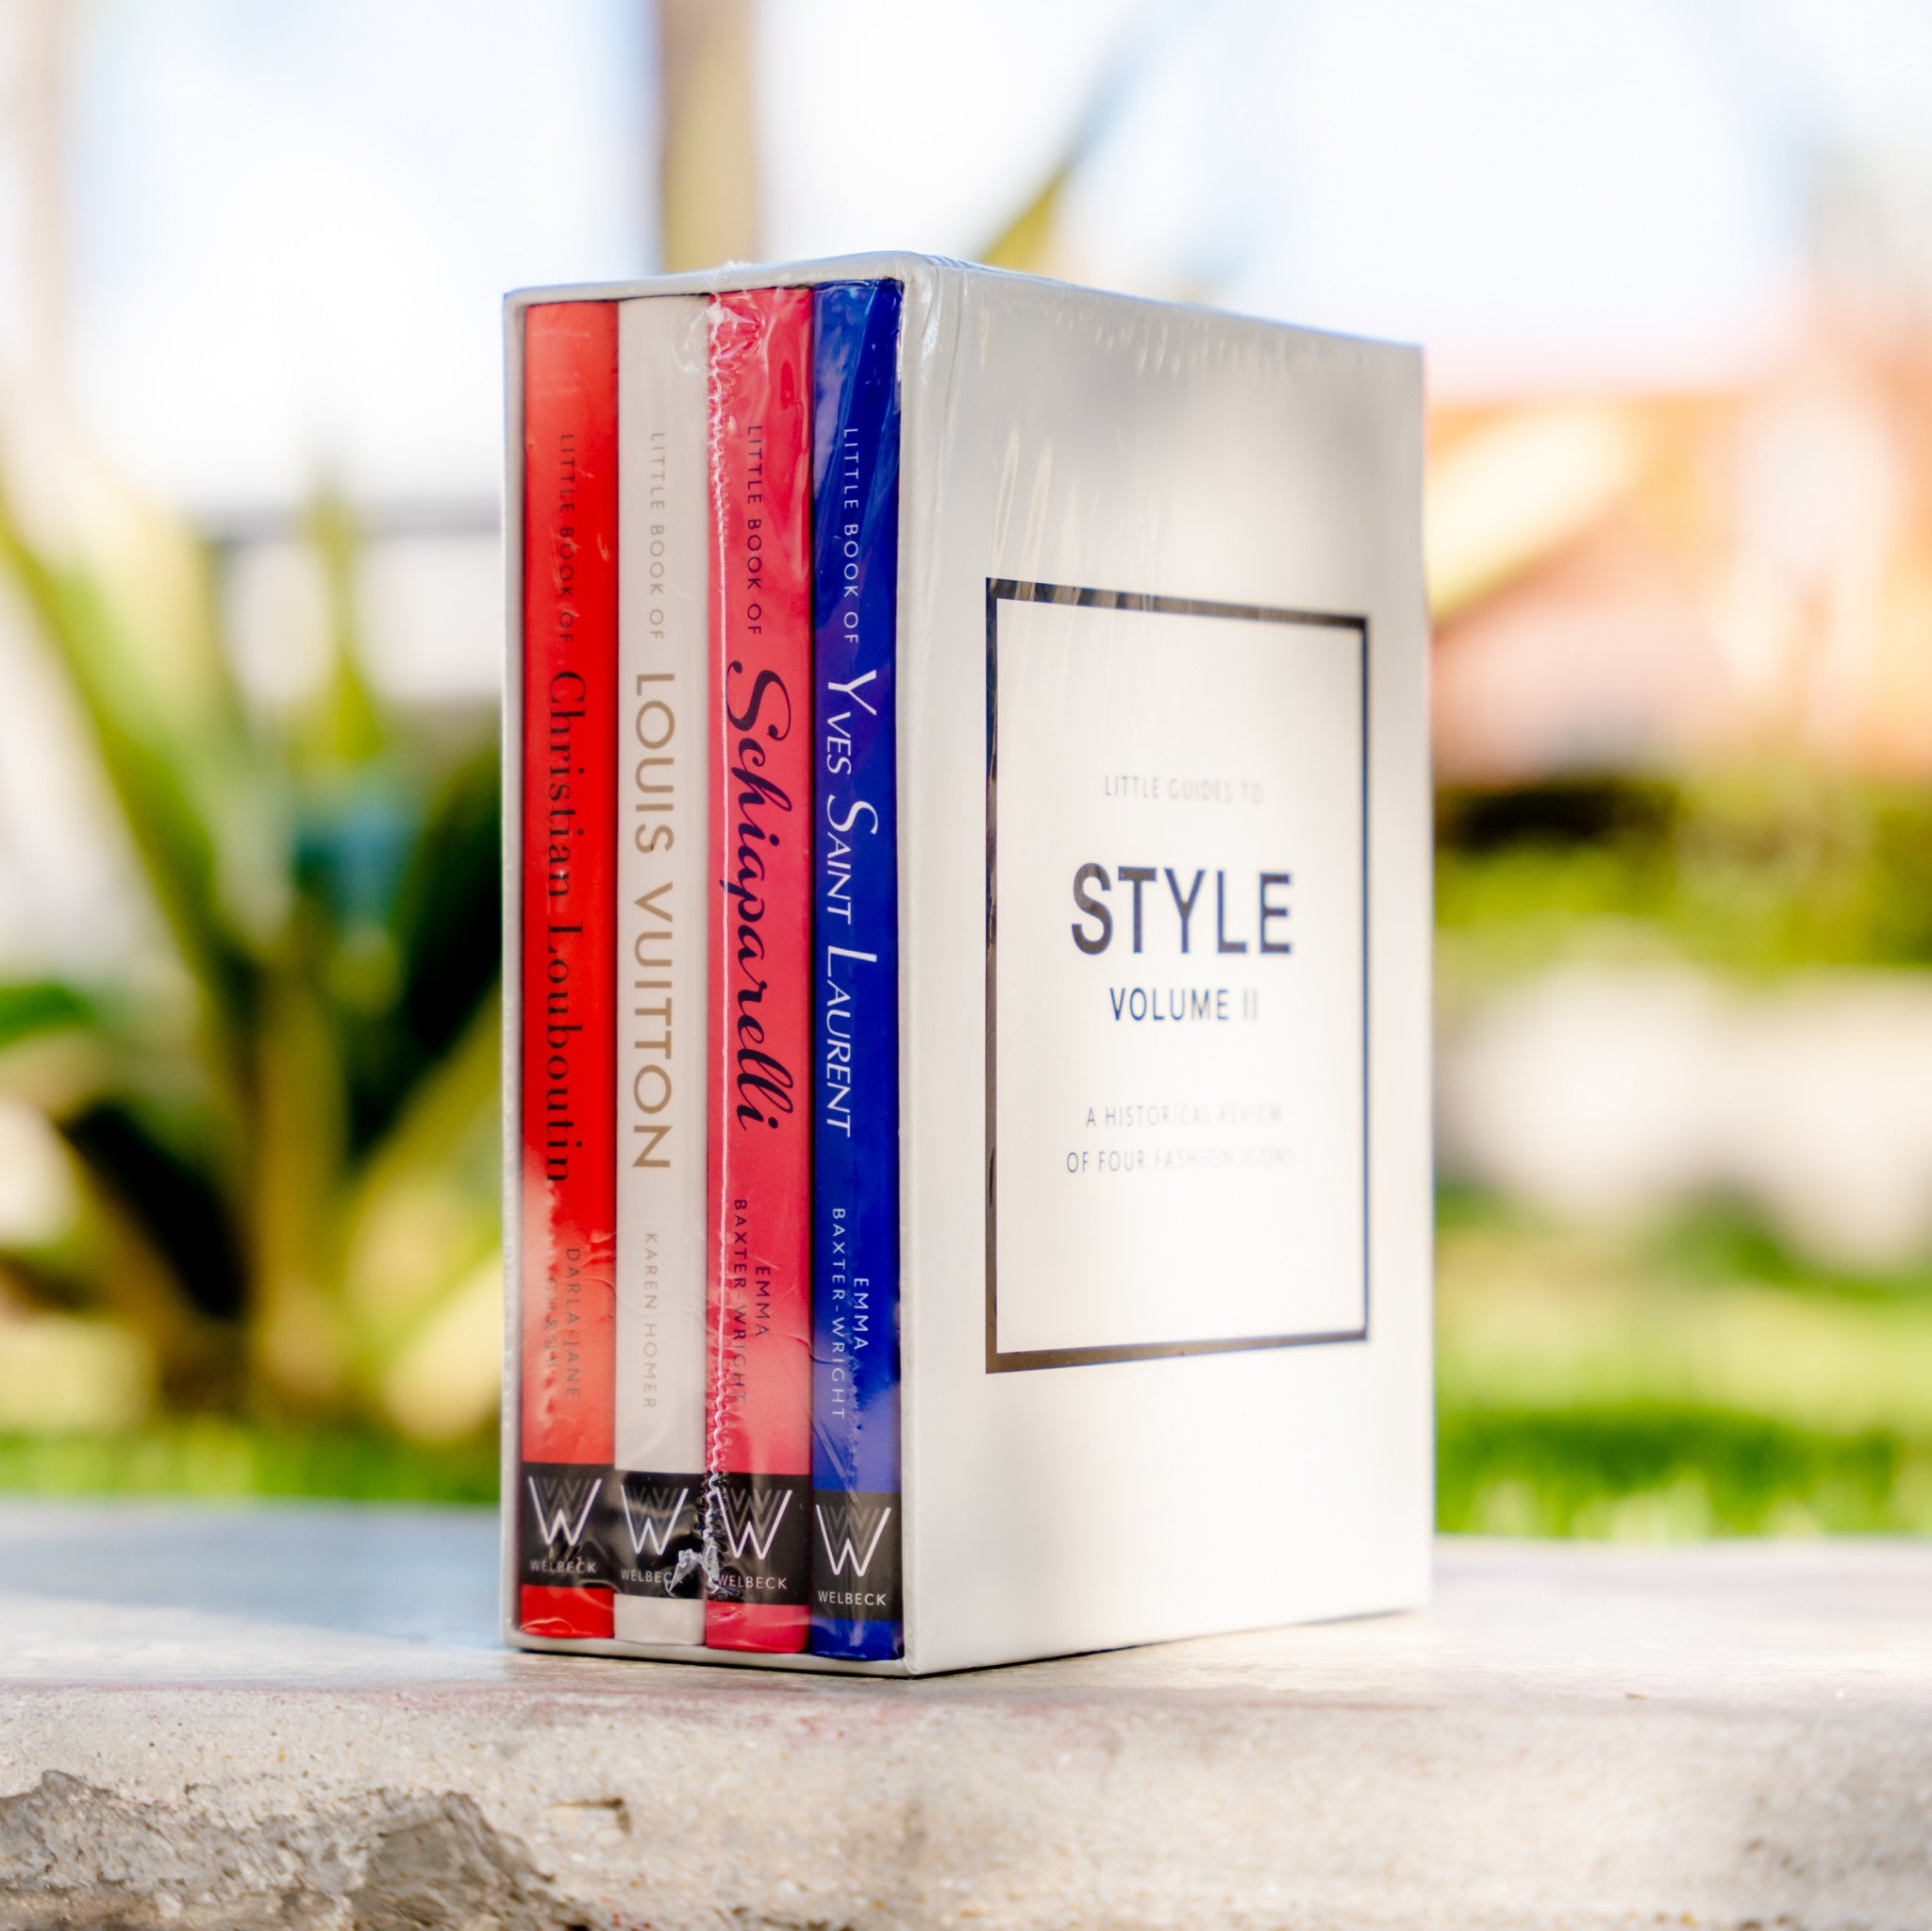 Little Guides to Style II: A Historical Review of Four Fashion Icons - Wynwood Walls Shop